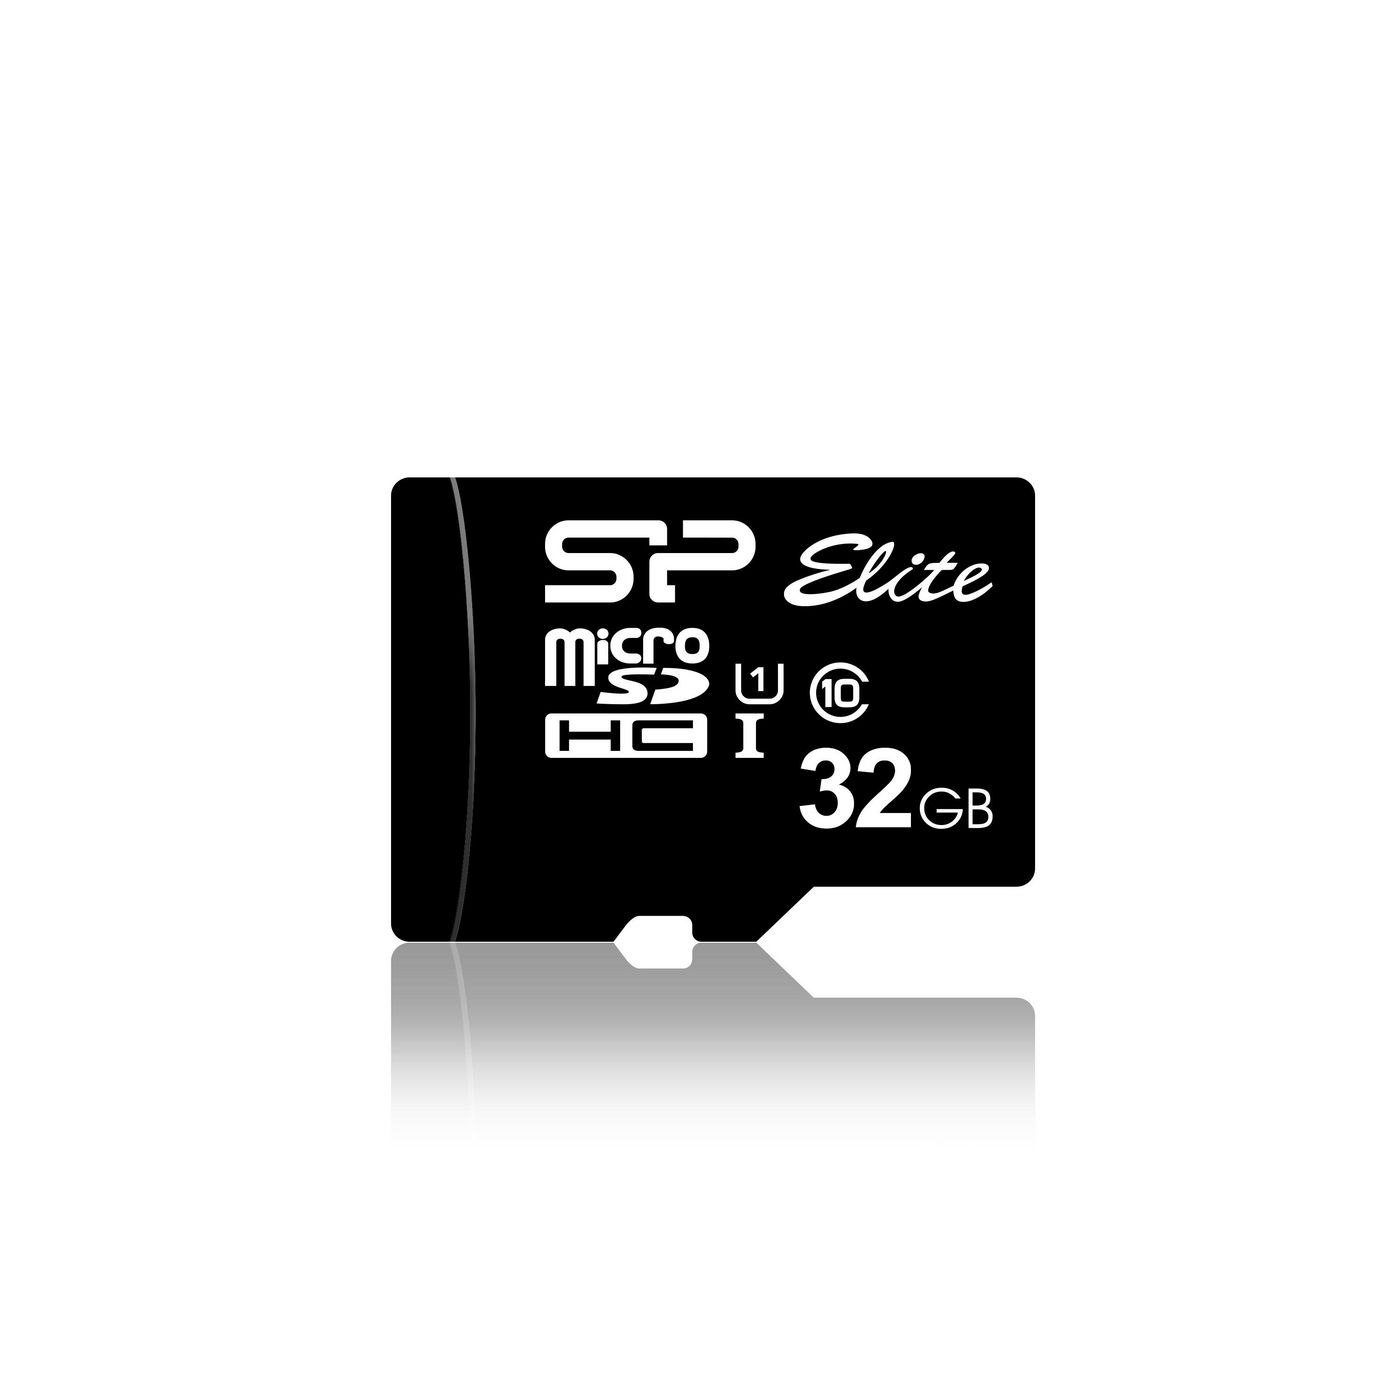 Silicon-Power SP032GBSTHBU1V10SP Micro SDCard 32GB UHS-1 Elite 